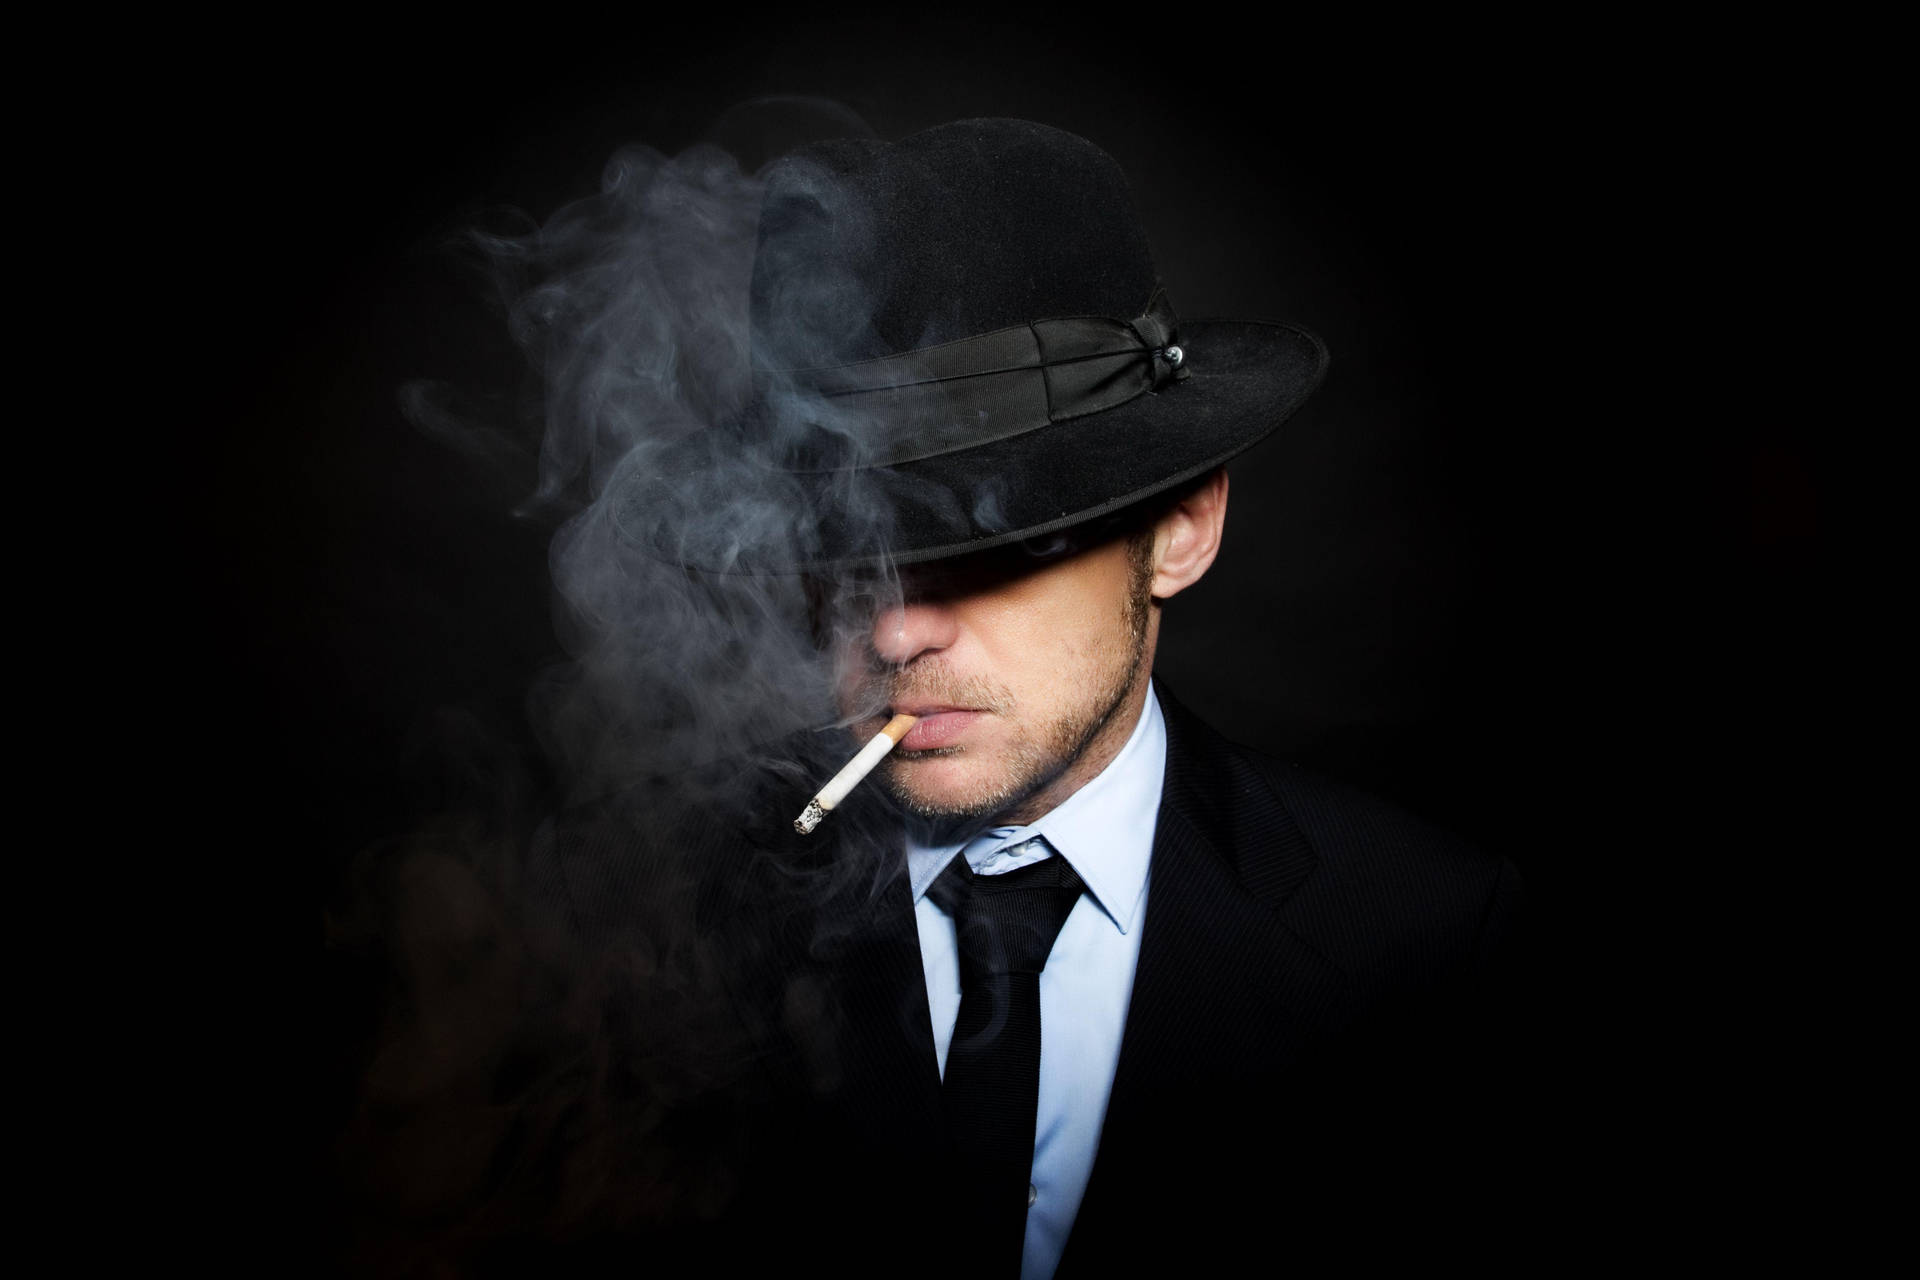 Boy Smoke With Suit And Tie Wallpaper